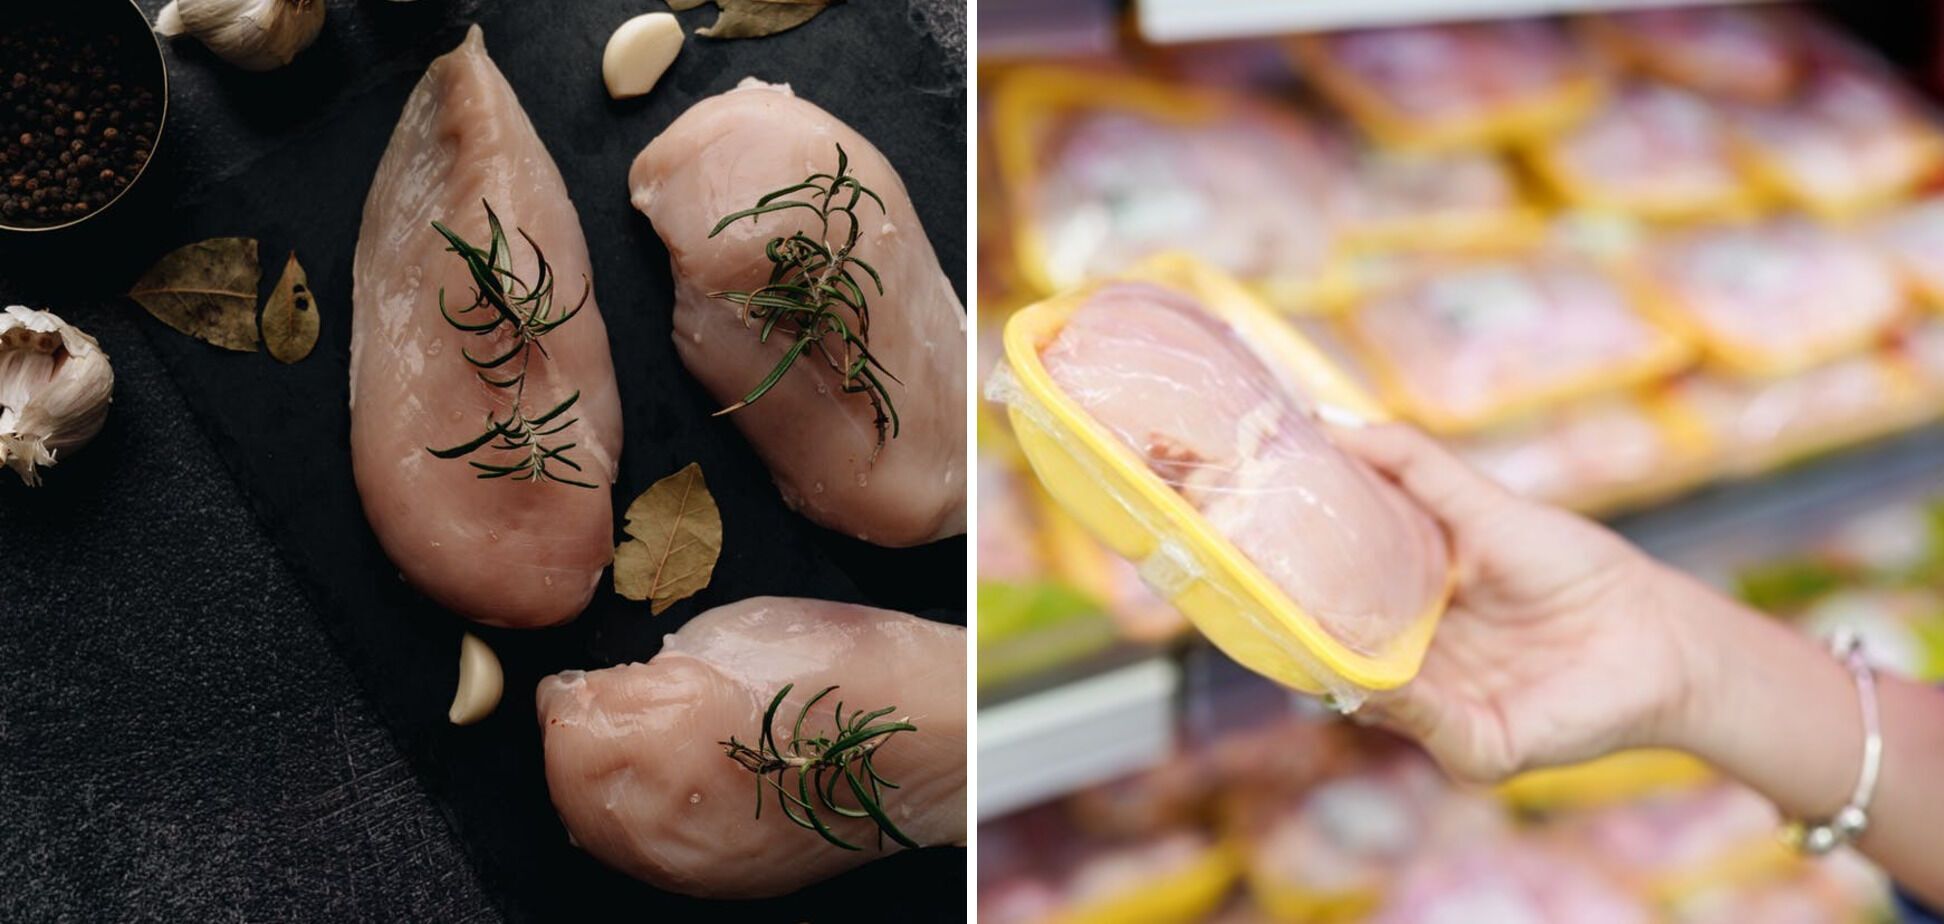 Raw chicken fillet for cooking